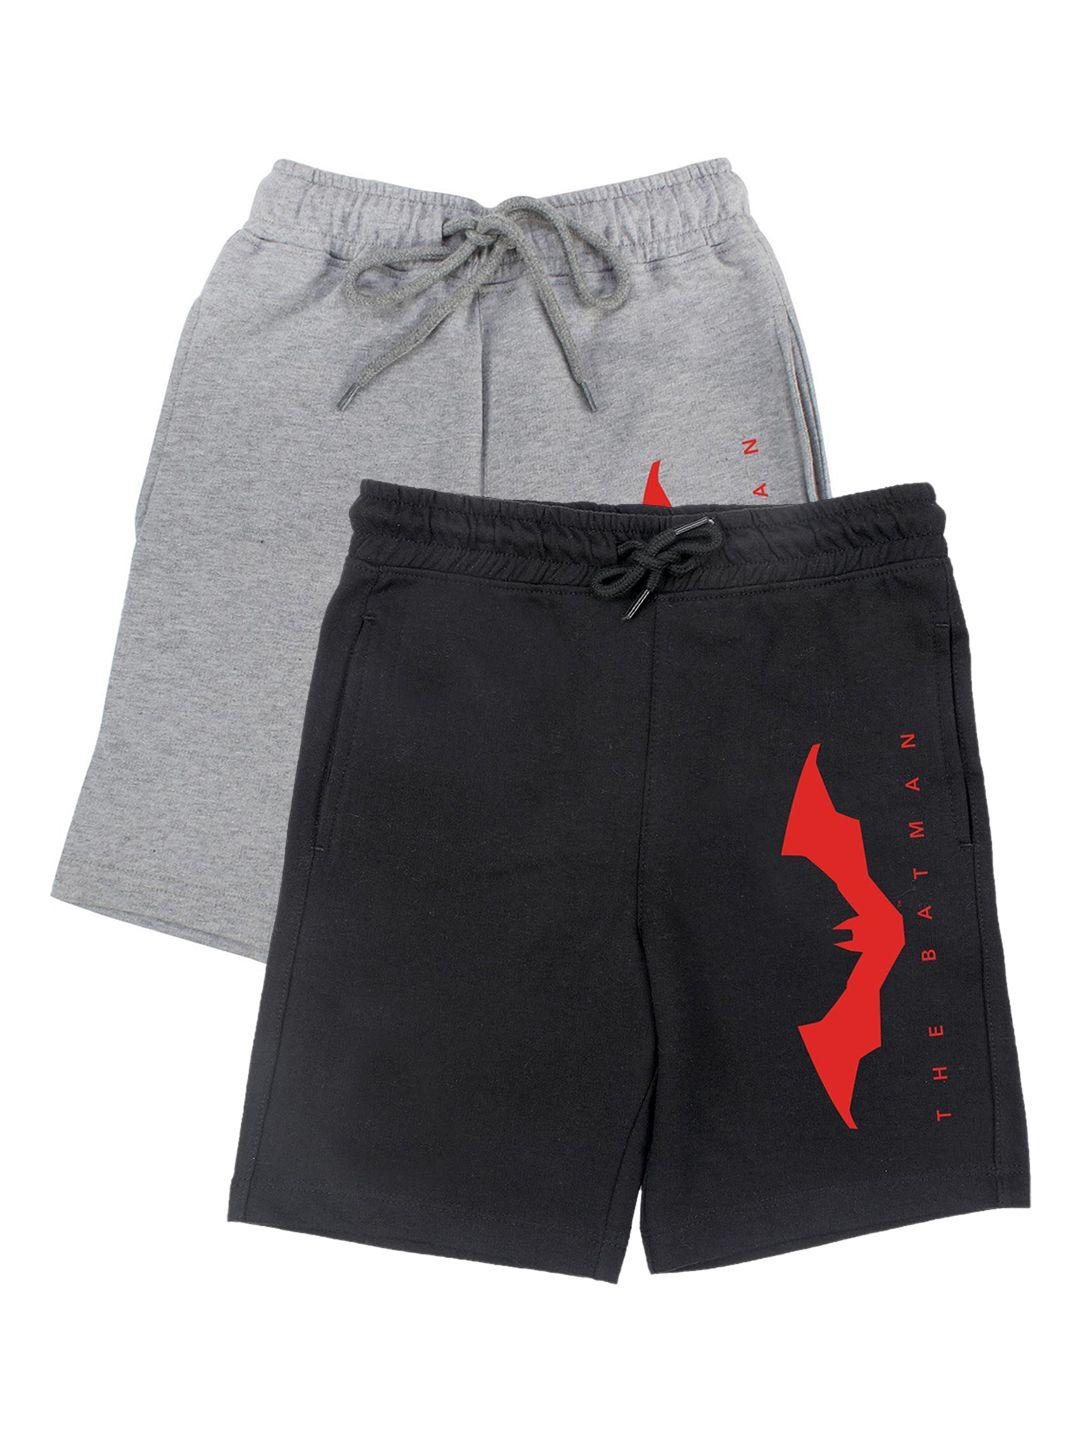 dc by wear your mind boys 2 batman outdoor shorts